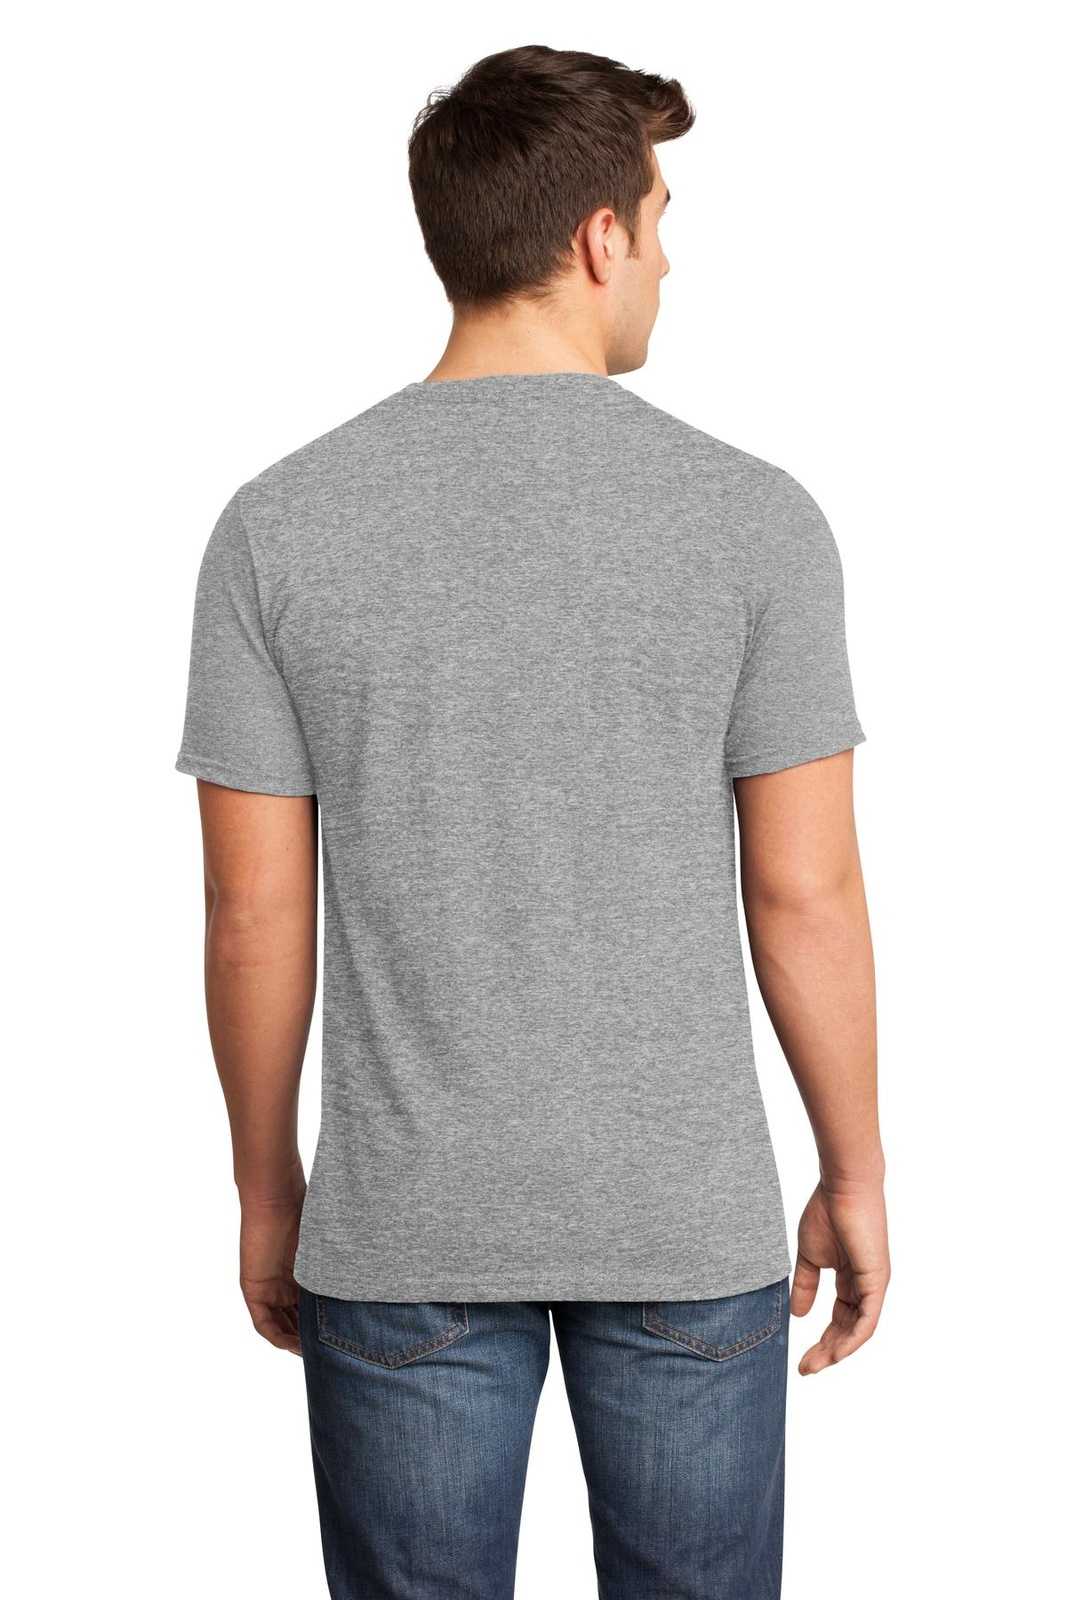 District DT6500 Very Important Tee V-Neck - Light Heather Gray - HIT a Double - 2